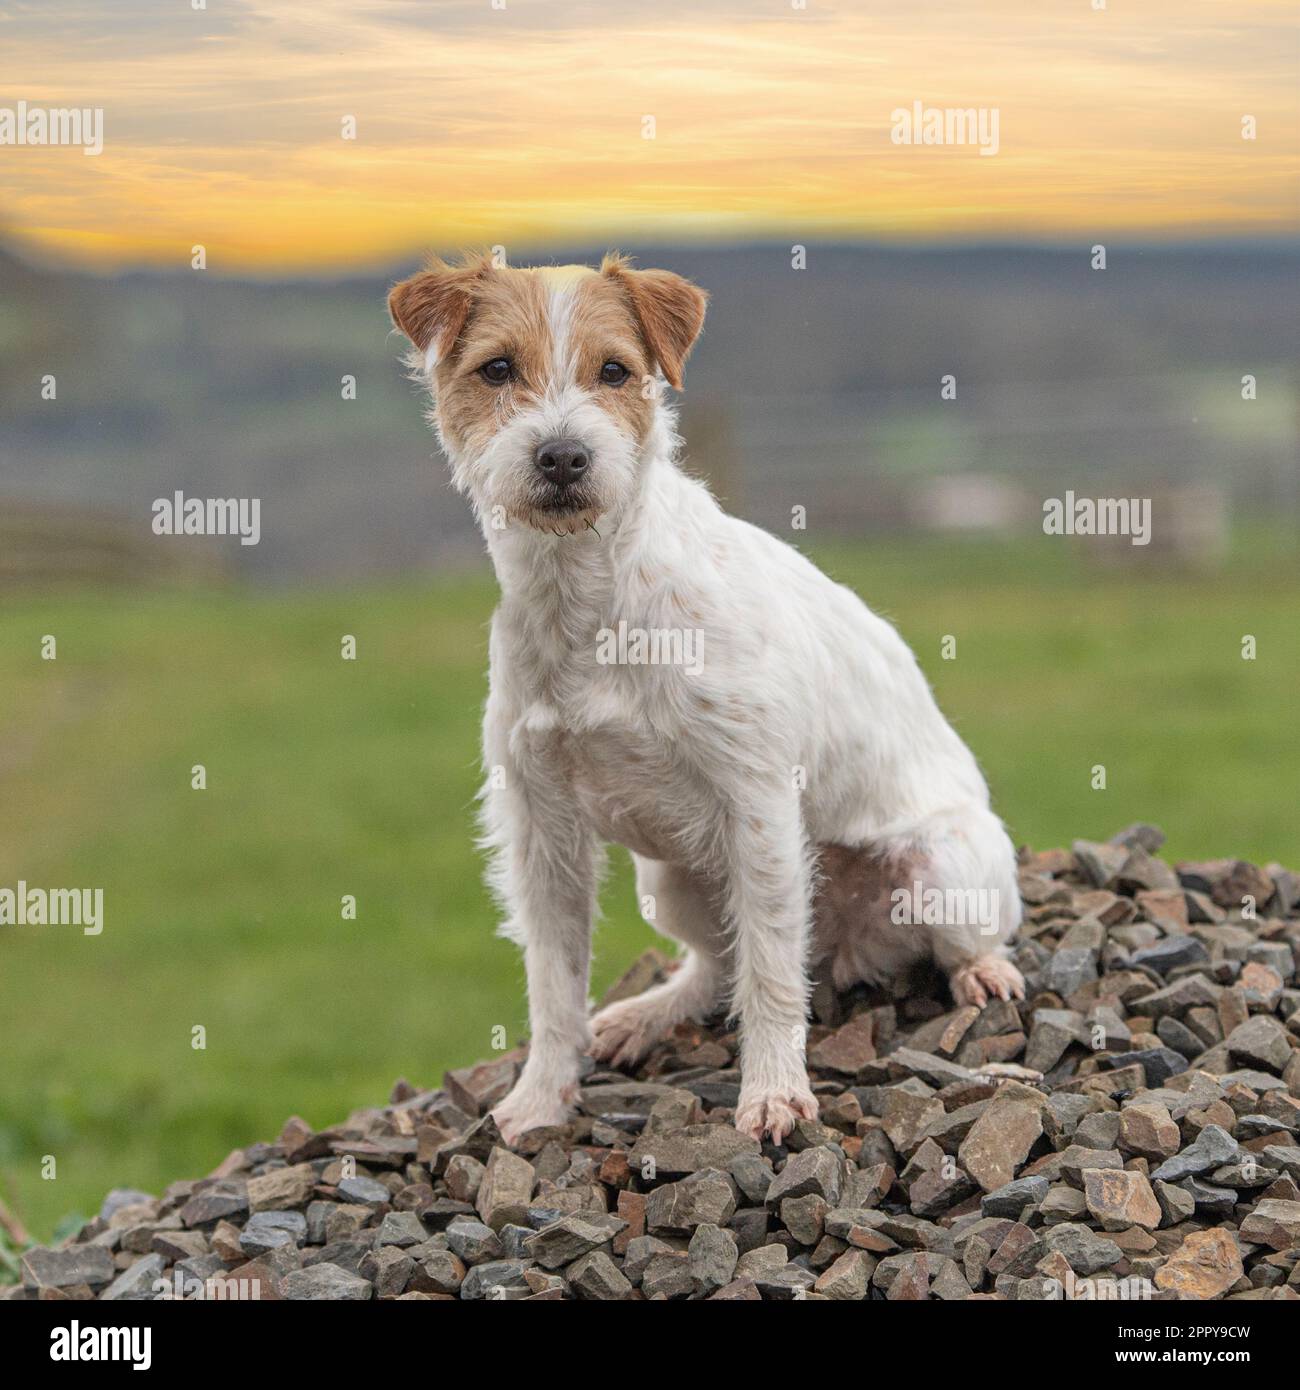 https://c8.alamy.com/comp/2PPY9CW/parson-jack-russell-terrier-2PPY9CW.jpg